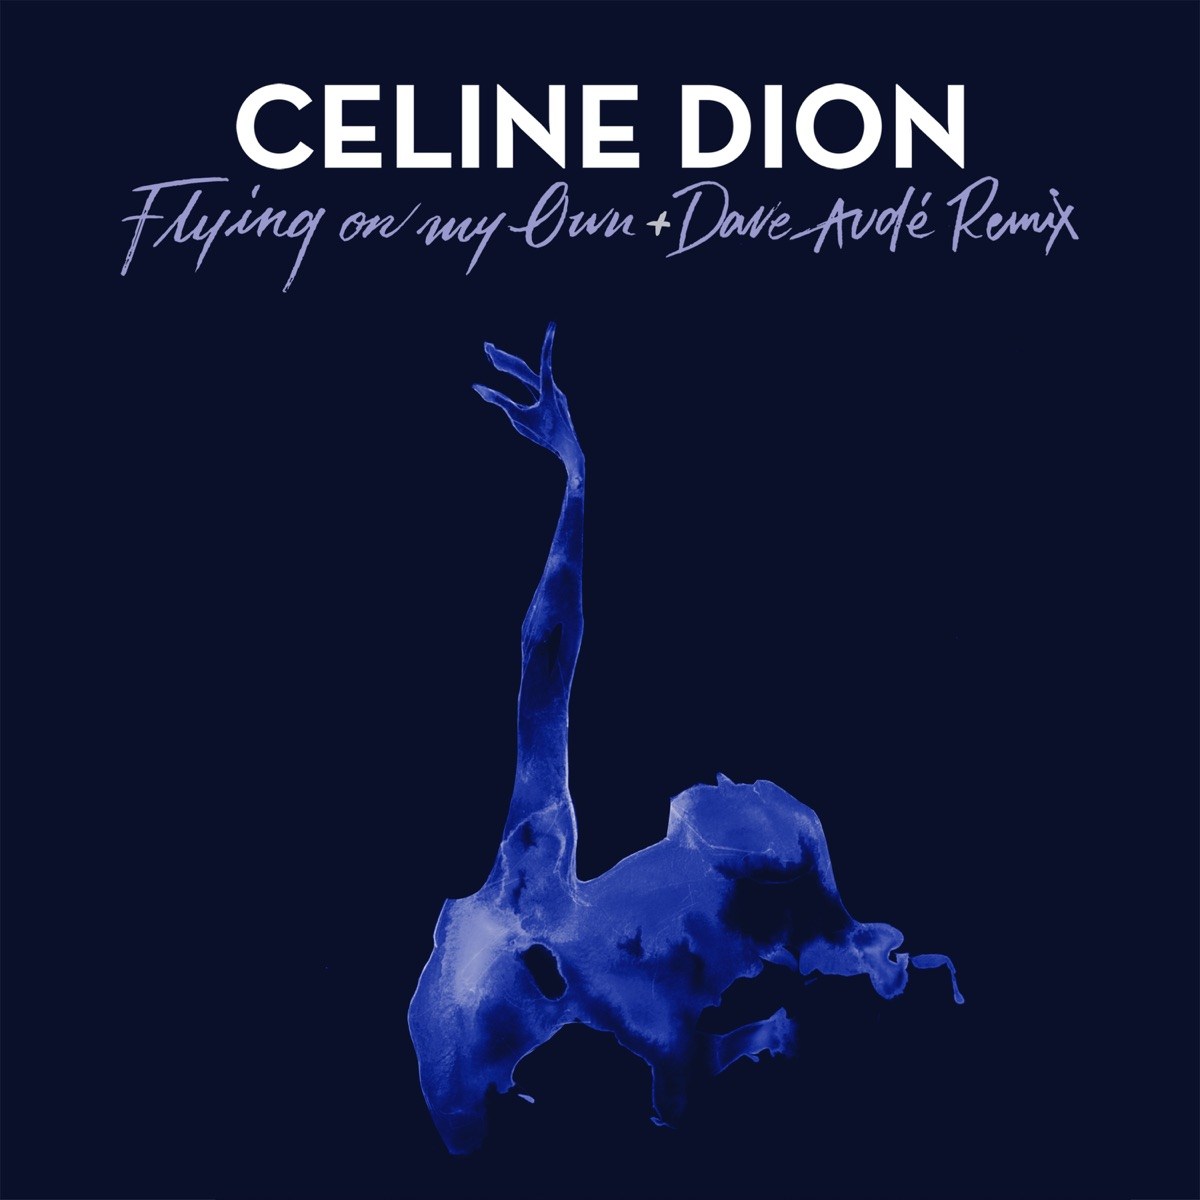 download celine dion incredible Mp3